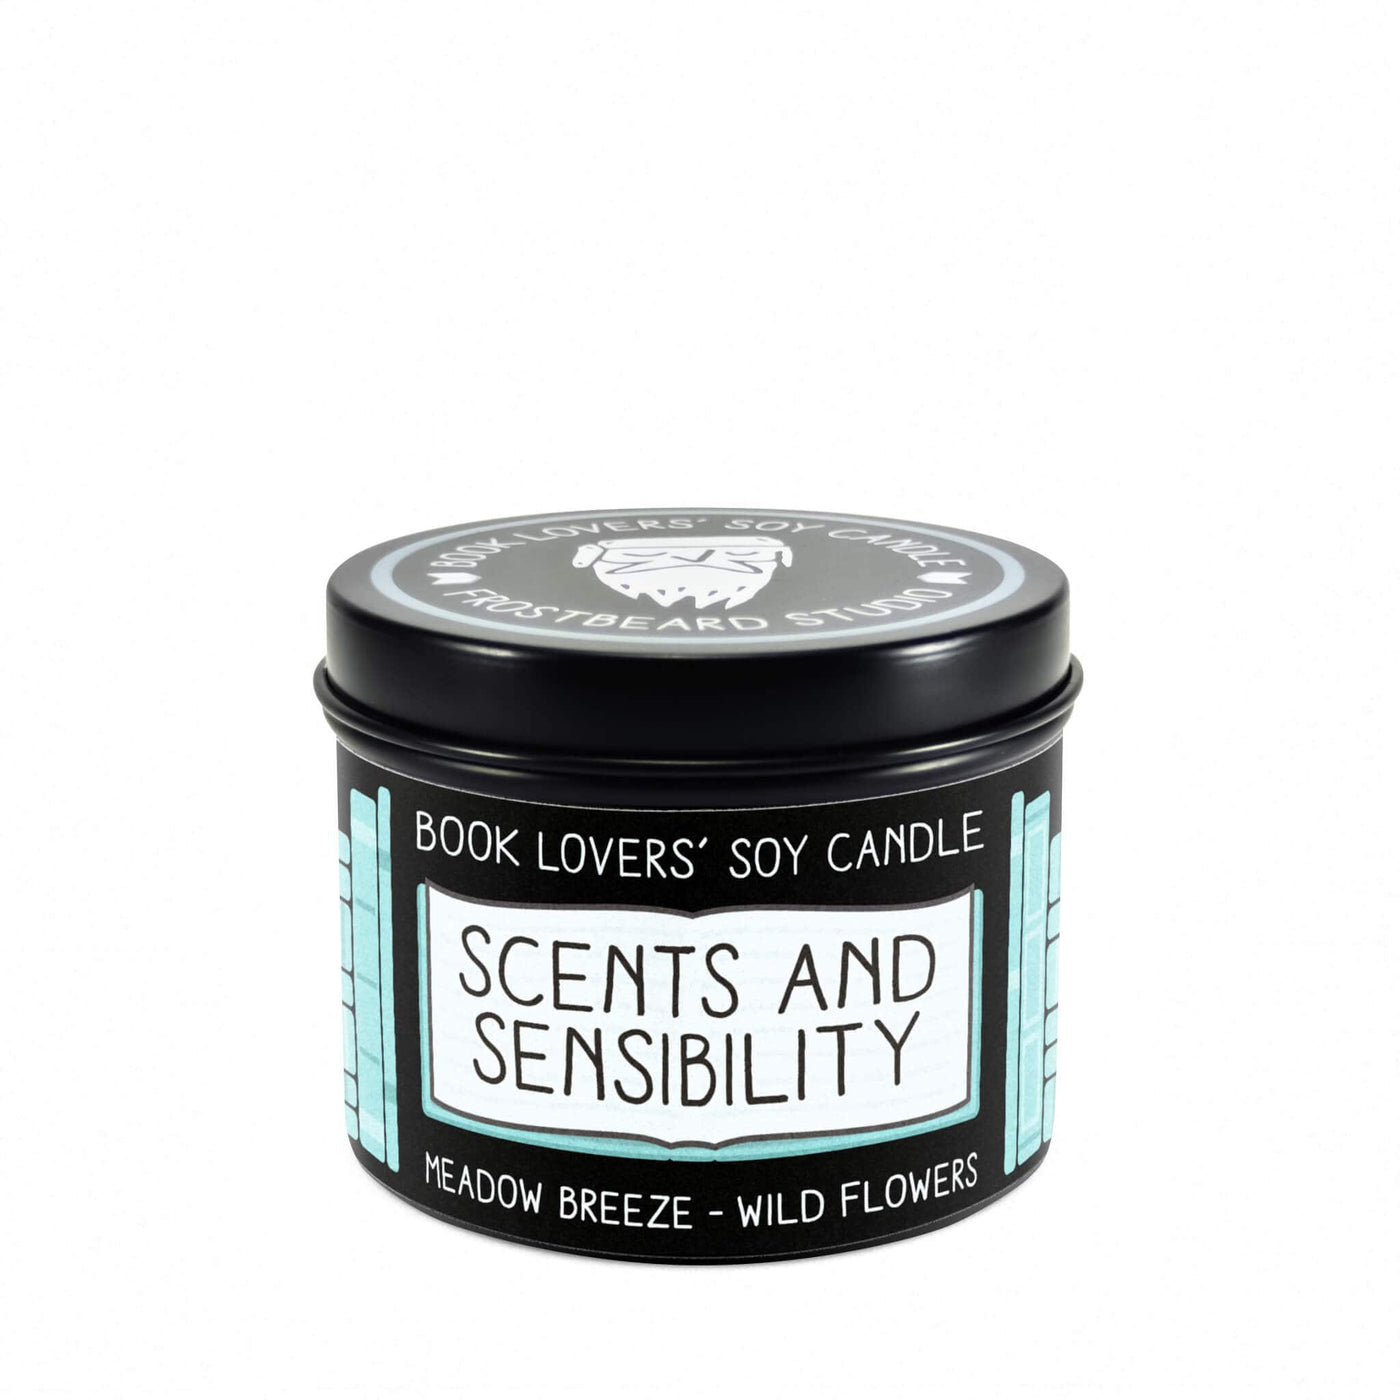 Scents and Sensibility - 4 oz Tin - Book Lovers' Soy Candle - Frostbeard Studio